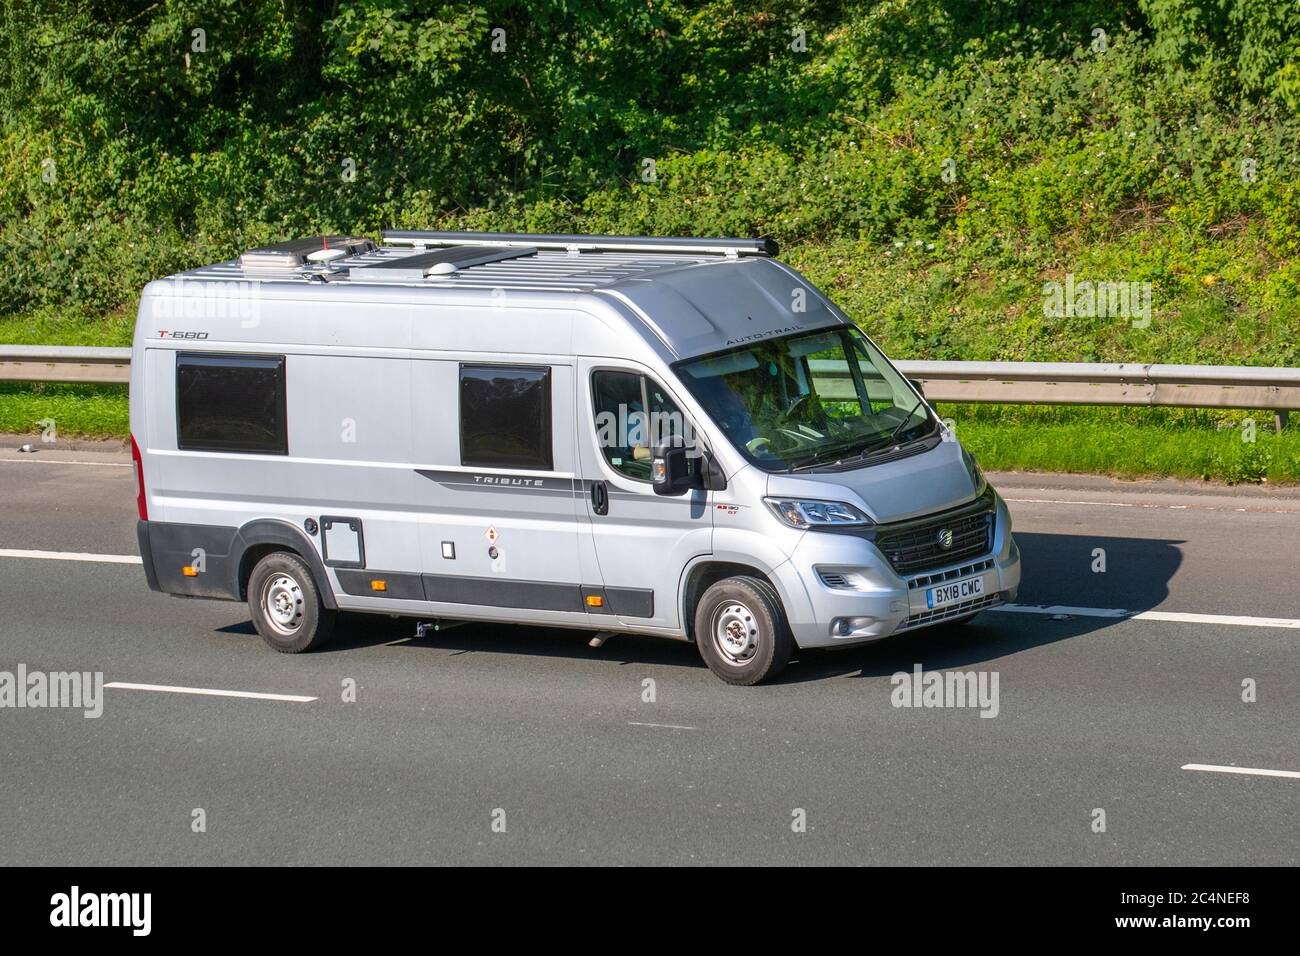 2018 silver Fiat Auto-Trail Tribute T680 S; Vehicular traffic moving vehicles, cars driving vehicle on UK roads, motors, motoring on the M6 motorway highway network. Stock Photo